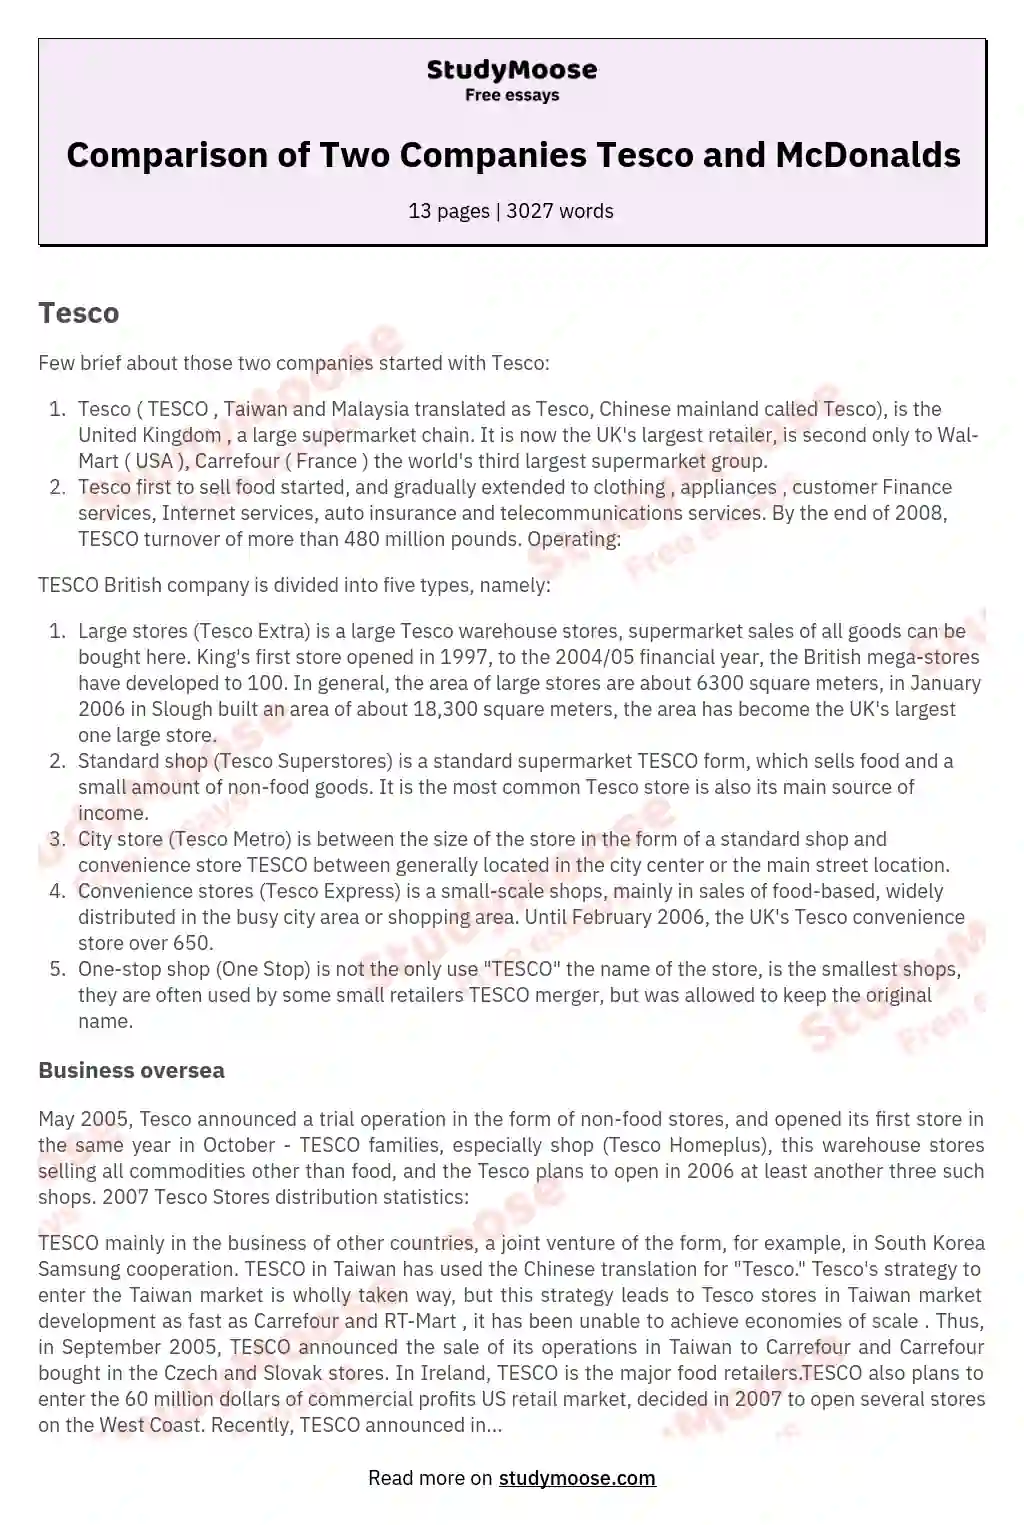 Comparison of Two Companies Tesco and McDonalds essay